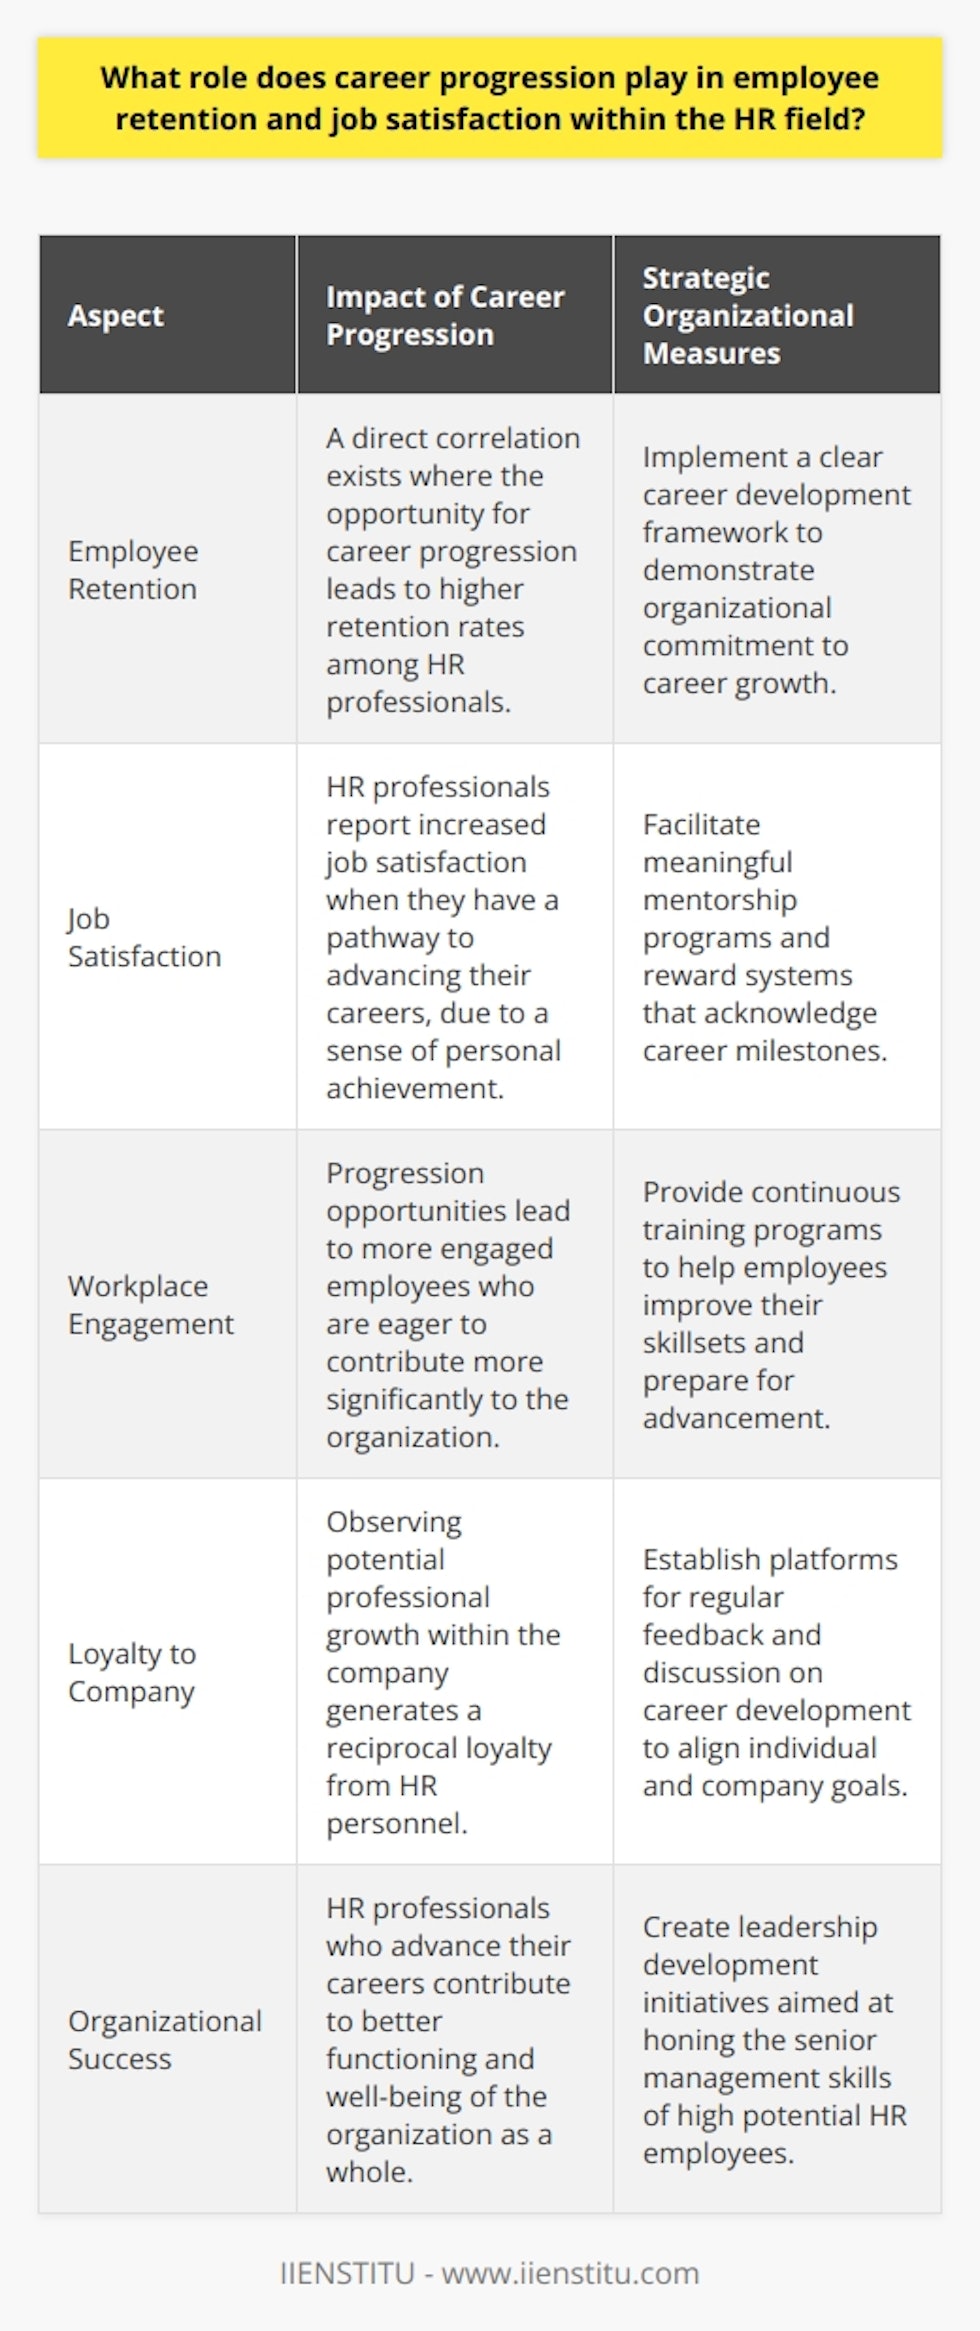 Career progression stands as a pivotal element in the retention and satisfaction of employees within the Human Resources (HR) sector. HR professionals typically have an intrinsic motivation to ascend in their careers by acquiring enhanced roles, responsibilities, and through the continuous refinement of their professional expertise. The pursuit of career advancement not only shapes the trajectory of an HR professional’s job pathway but also profoundly amplifies their job satisfaction. As HR individuals climb the career ladder, they often report a notable increase in workplace engagement and a burgeoning sense of accomplishment. Developing new skills and gaining the ability to contribute more significantly to organizational success leads to elevated levels of professional gratification. This sense of fulfillment acts as a compelling incentive, spurring employees to persist in their skill enhancement and to eagerly embrace new professional hurdles.At the intersection of career development and employee loyalty, it’s evident that career progression is intimately tied to retention rates. The view from within the HR discipline is no different. HR professionals who observe a dearth of advancement opportunities may cast their gaze externally, in search of organizations that offer more promising career trajectories. Conversely, HR personnel who perceive a strong organizational commitment to their professional growth often demonstrate a reciprocal loyalty, opting to remain within the company and grow their careers there.To sustain and nurture this bond, organizations must undertake strategic measures to underpin HR professionals’ career advancement. Establishing a lucid, comprehensive career development framework that delineates prospective career paths, competencies, and professional requisites can act as a beacon for HR staff, guiding their growth. Furthermore, the provision of mentorship arrangements alongside ongoing training and developmental sessions fortifies the skillset of HR professionals, equipping them with the necessary tools to progress.In essence, the role of career progression in the realm of HR cannot be overstated in terms of its influence on job satisfaction and employee retention. Organizations that dedicate effort into advancing the careers of their HR personnel are likely to construct a workplace echelon that is both contented and steadfast. The end-result of such strategic investment is a robust, proficient HR department that propels the greater well-being and functionality of the entire organization.